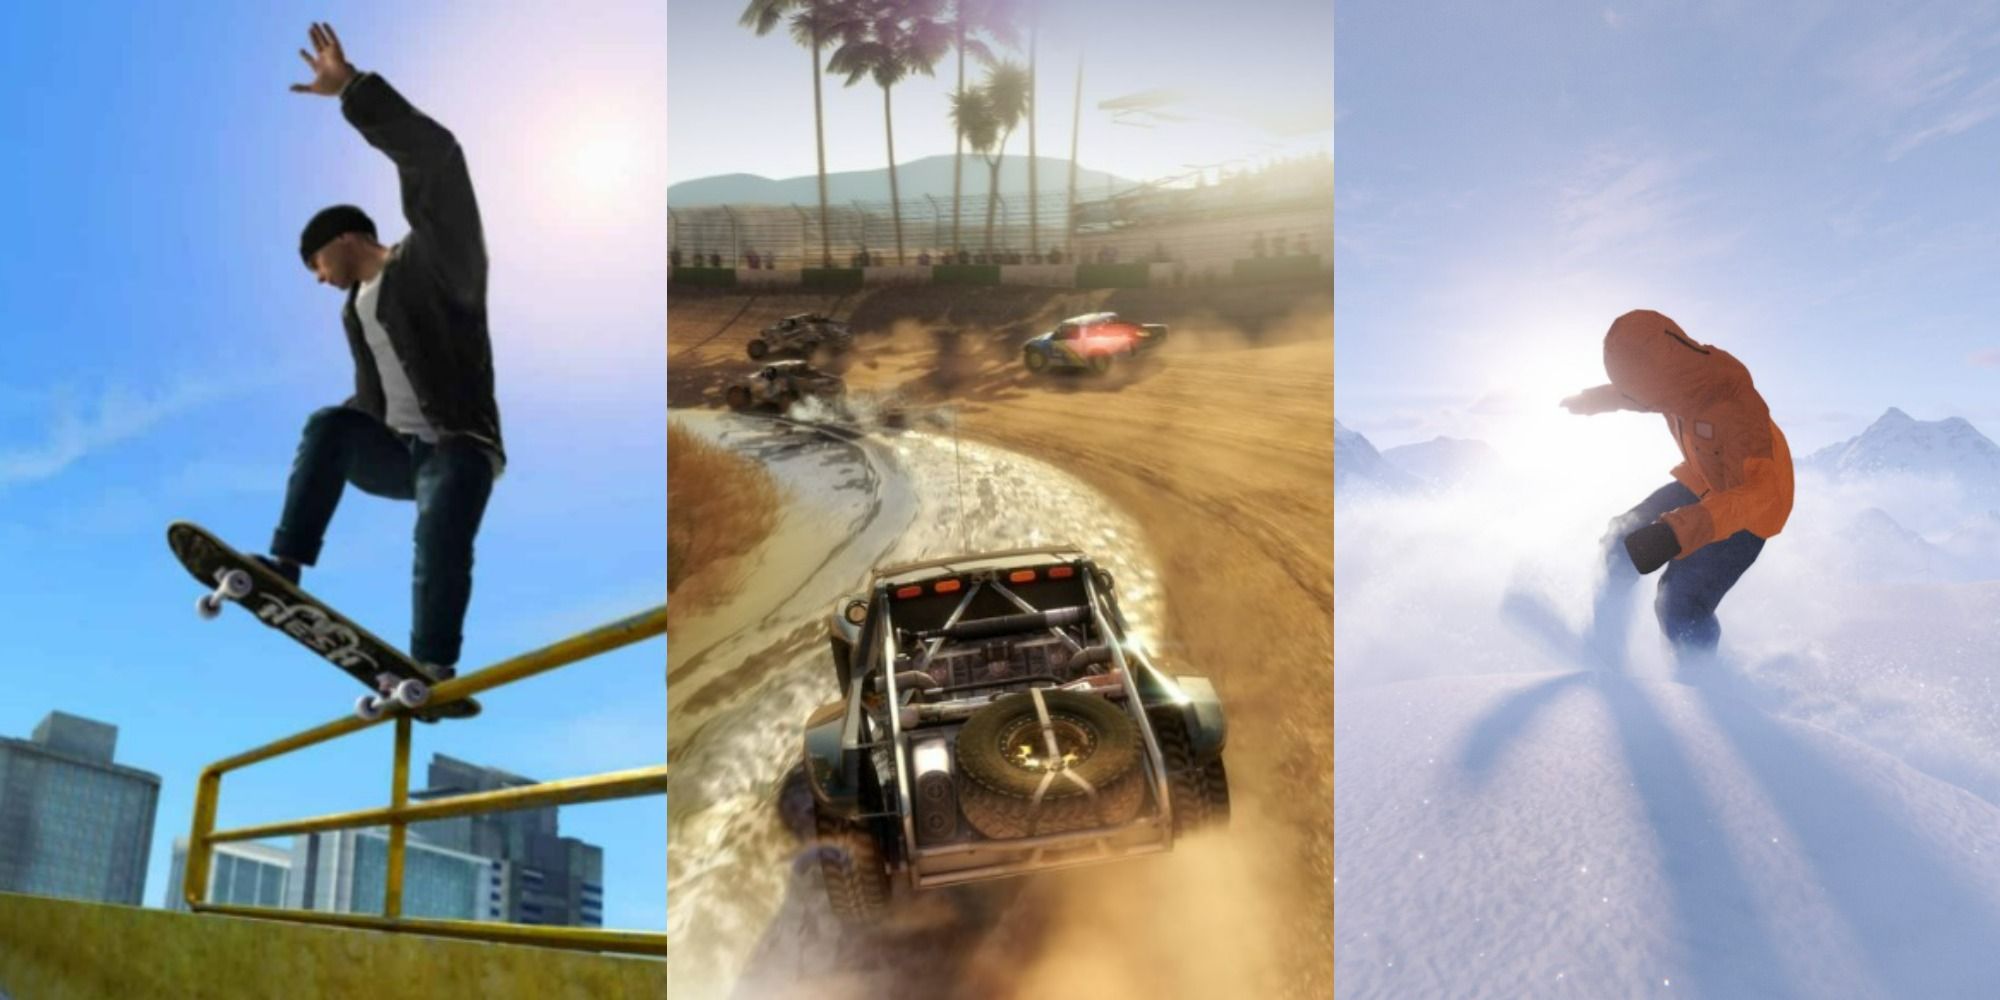 ea's skate with skater grinding a rail, dirt 2 buggy race, shredders snowboarding through powder featured